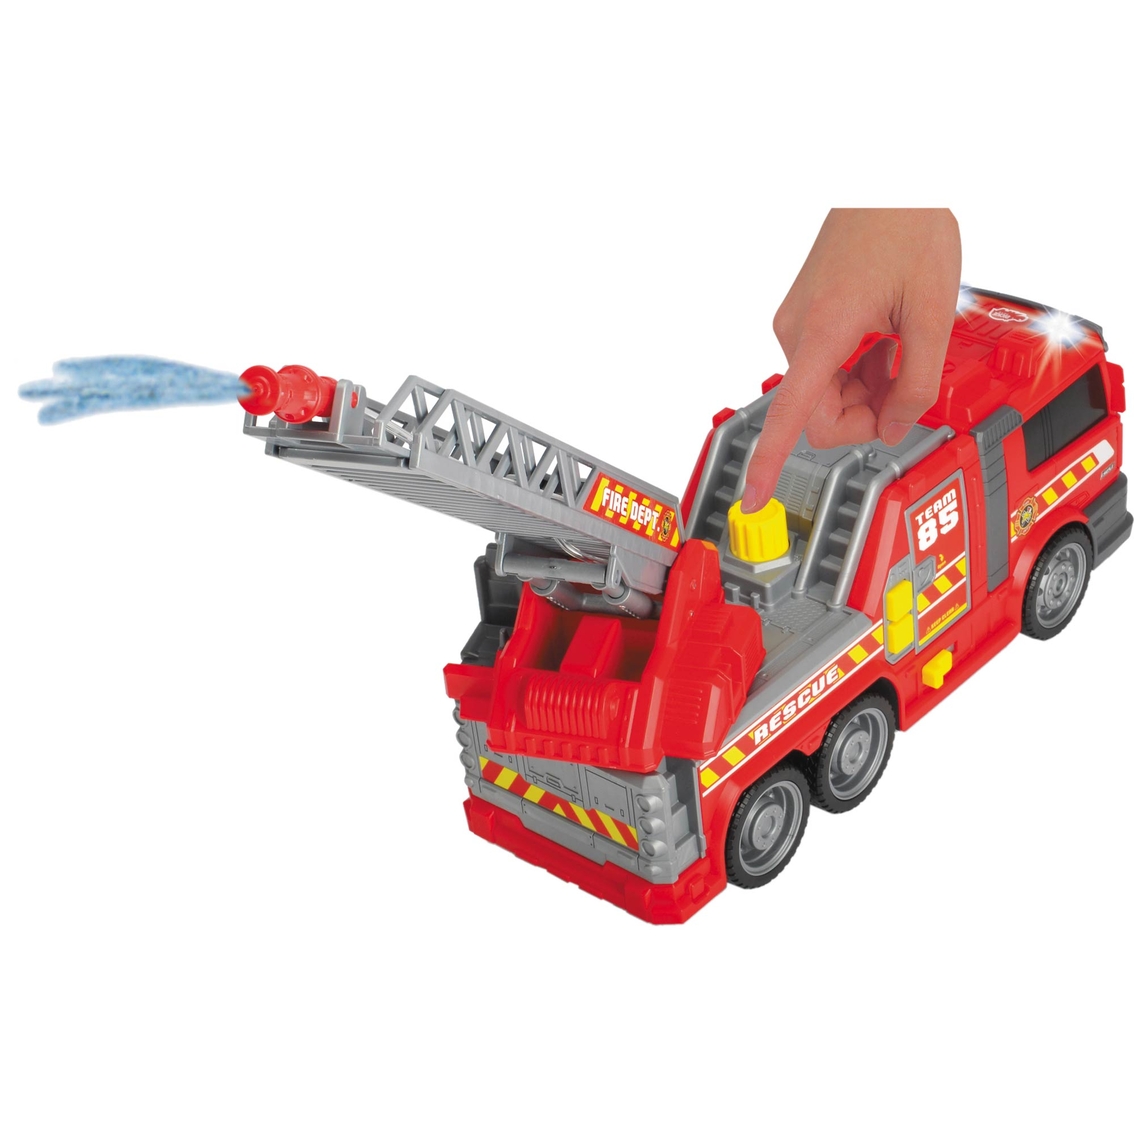 Dickie Toys Large Action Fire Fighter Vehicle - Image 4 of 4